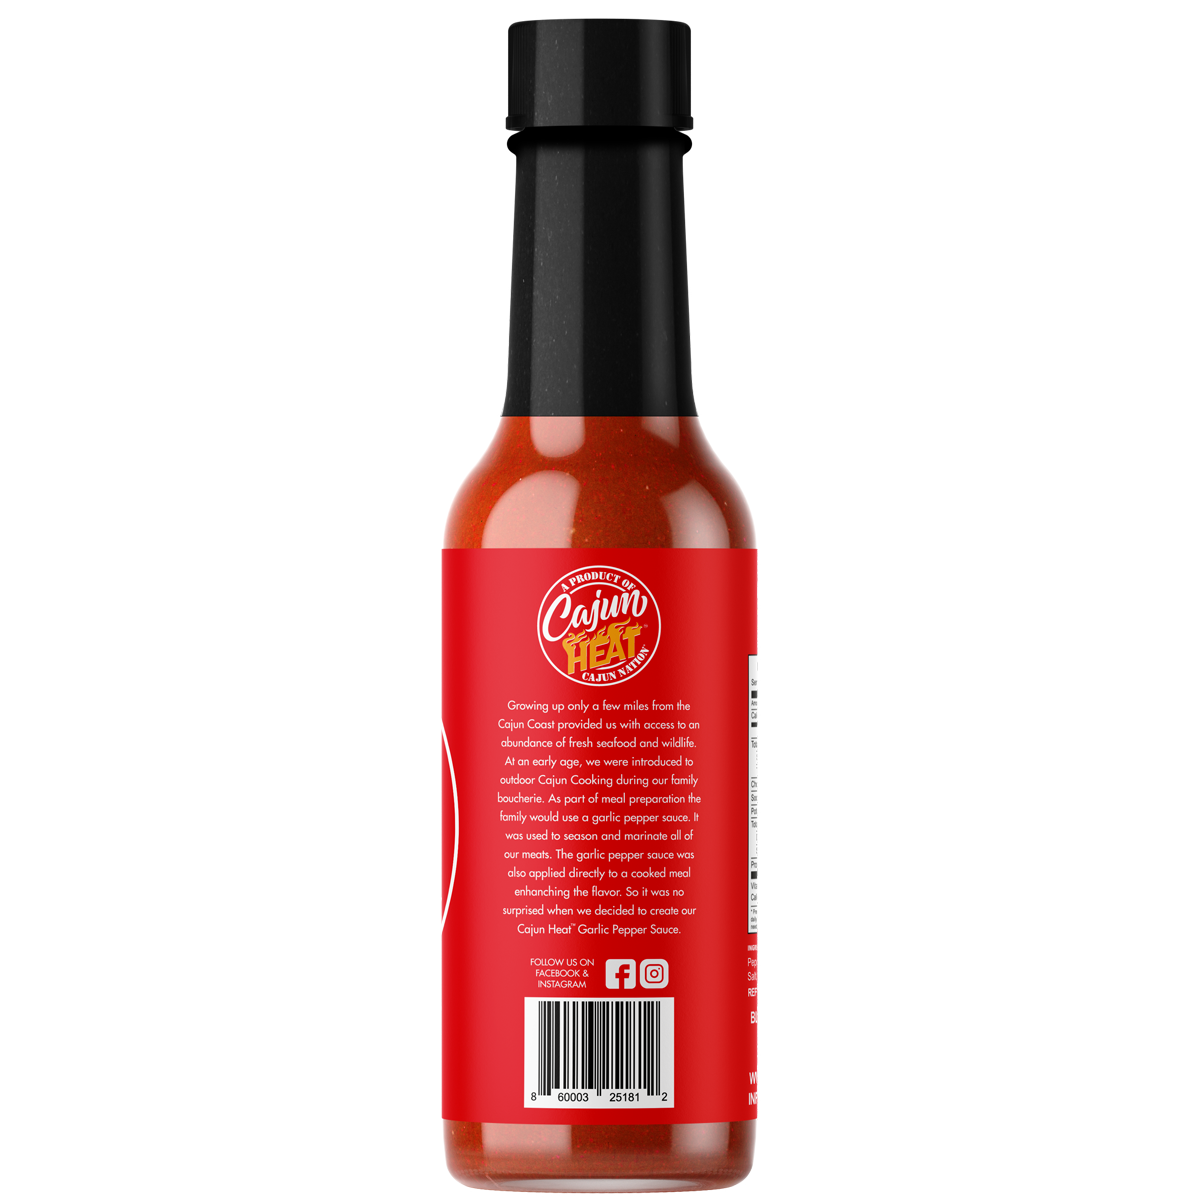 Cajun Nation Cajun Heat Low Sodium Garlic Pepper Sauce is a Certified Cajun LOW SODIUM 5 fluid ounces,  flavorful blend of Cajun Red Peppers and Garlic Juice with No MSG. It contains 100mg of sodium.  Made in Cajun Nation, Louisiana along the Cajun Coast.